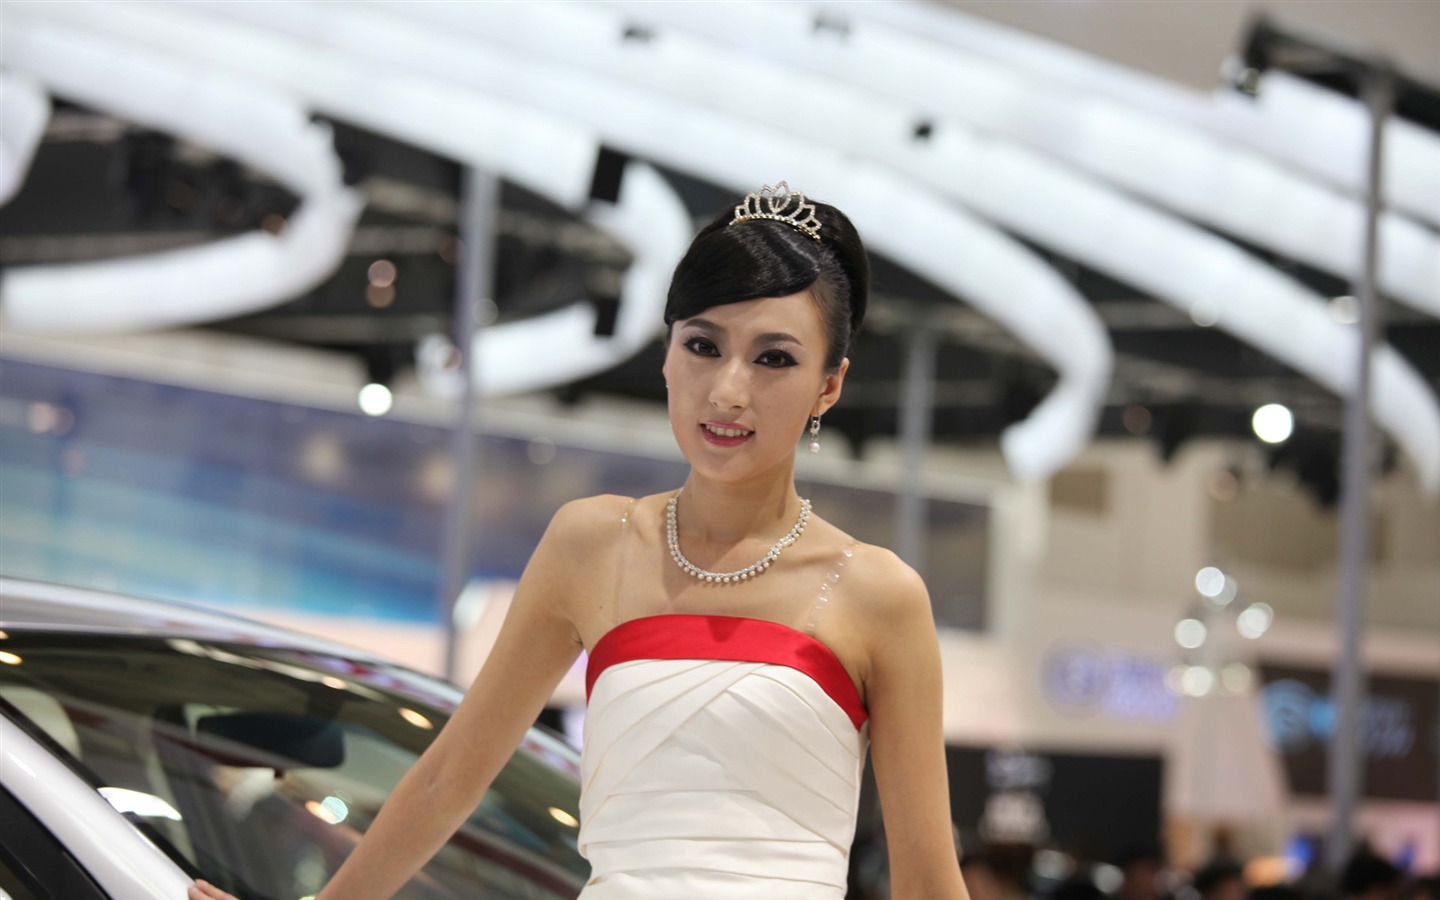 2010 Beijing International Auto Show beauty (1) (the wind chasing the clouds works) #27 - 1440x900